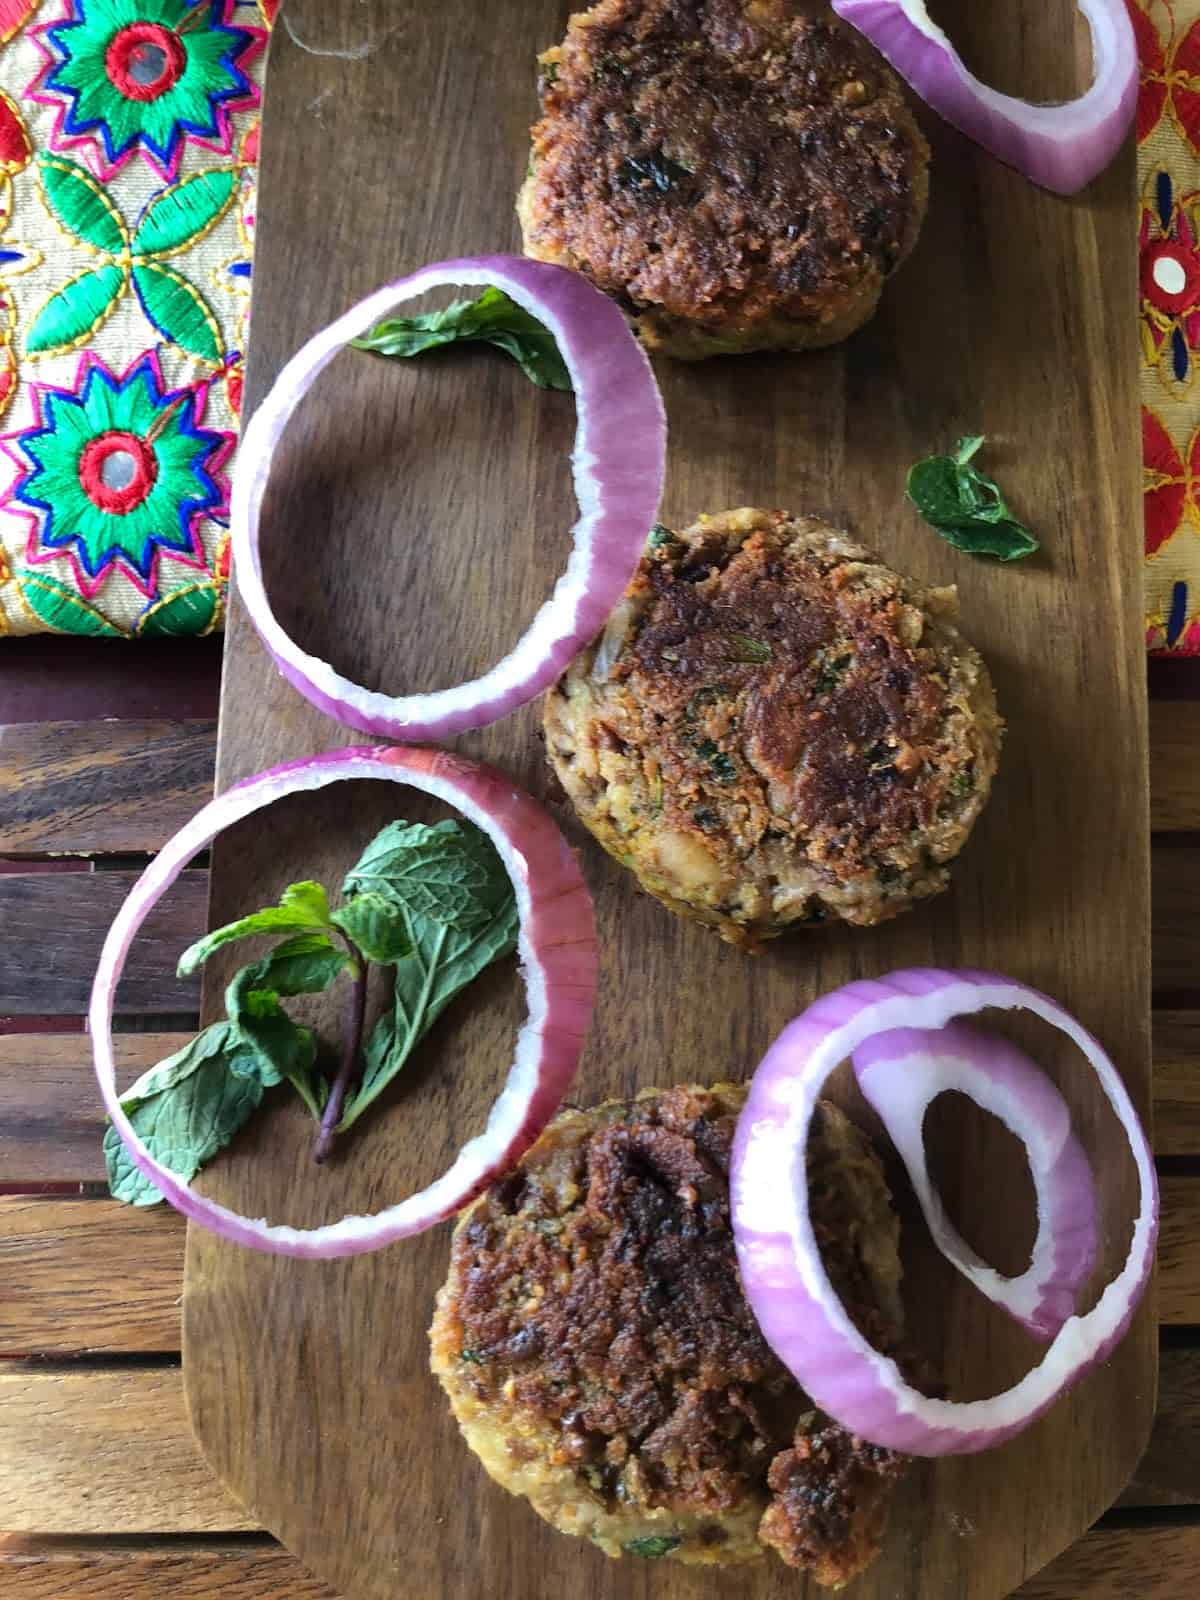 Galouti Kebab or Galoti Kebab is a melt-in-the-mouth vegetarian version of the famous Lucknowi Galoti Kebab. Often served at Iftar or parties with a yogurt-mint dip